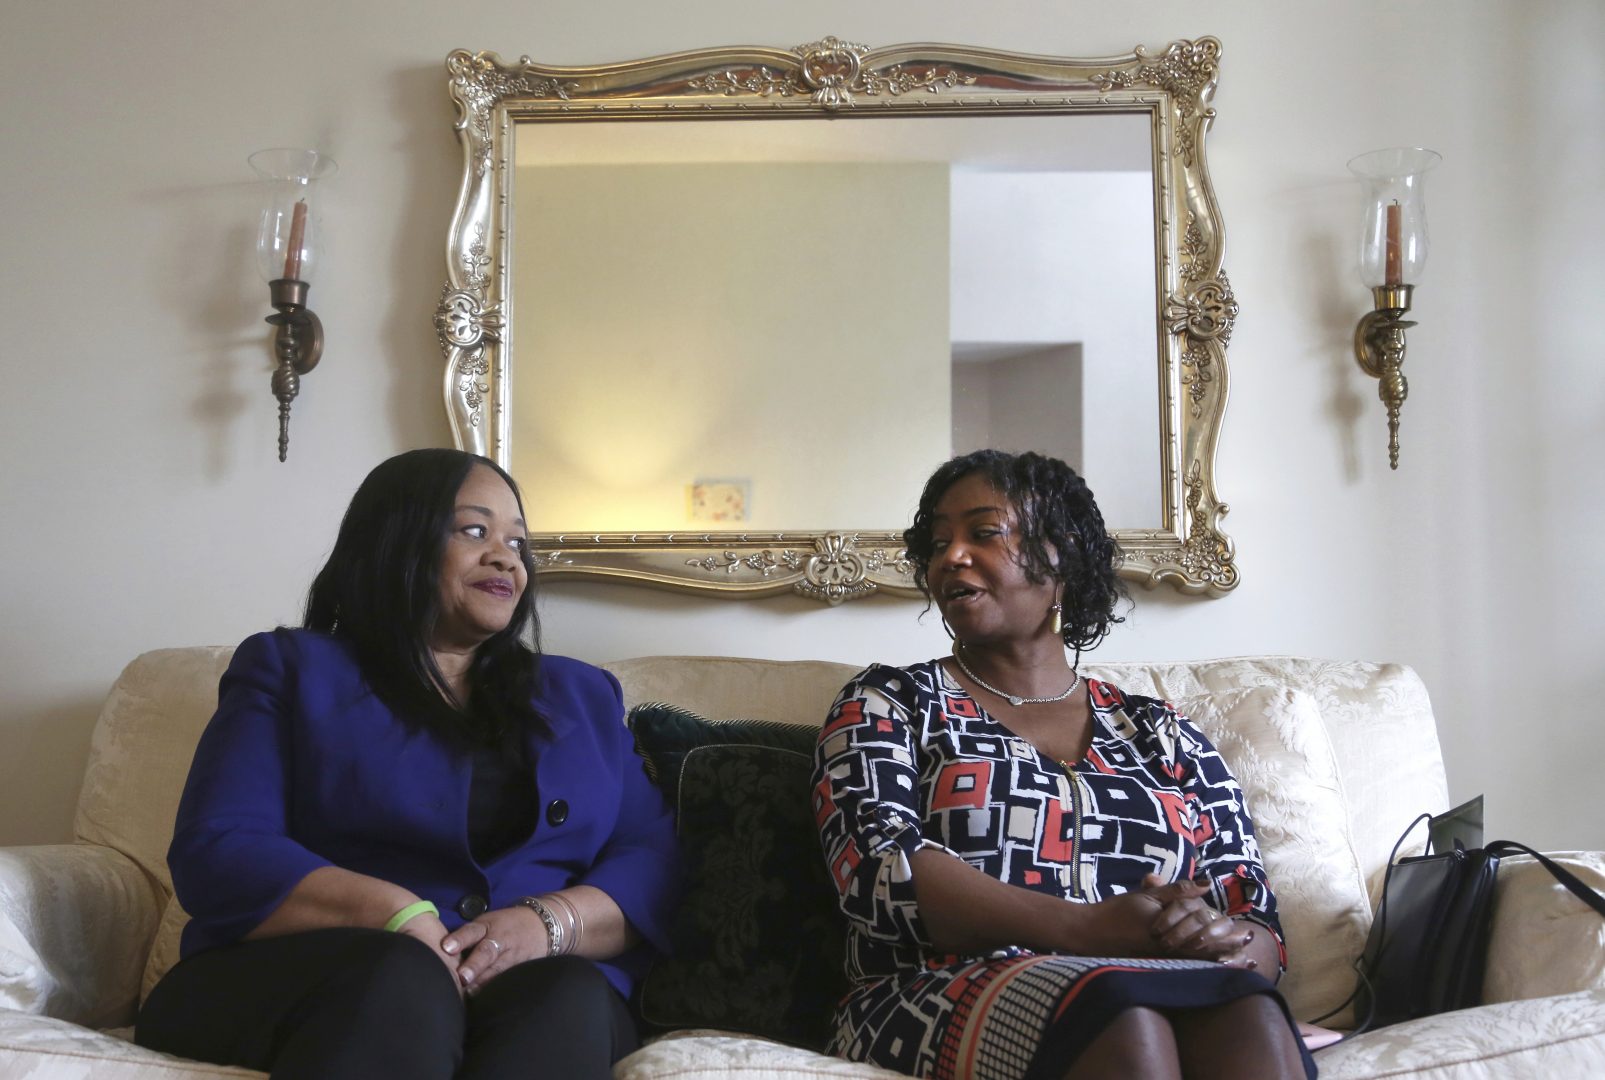 Sandra Thompson, right, speaks alongside Sandra Harrison, both golfers and members of a group of local women known as Sisters in the Fairway, during an interview with The Associated Press, Tuesday April 24, 2018 in York, Pa. Officials at the Grandview Golf Club in York called police on the group Saturday, accusing them of playing too slowly and holding up others behind them. On Sunday club co-owner JJ Chronister told the York Daily Record she called the women personally to 